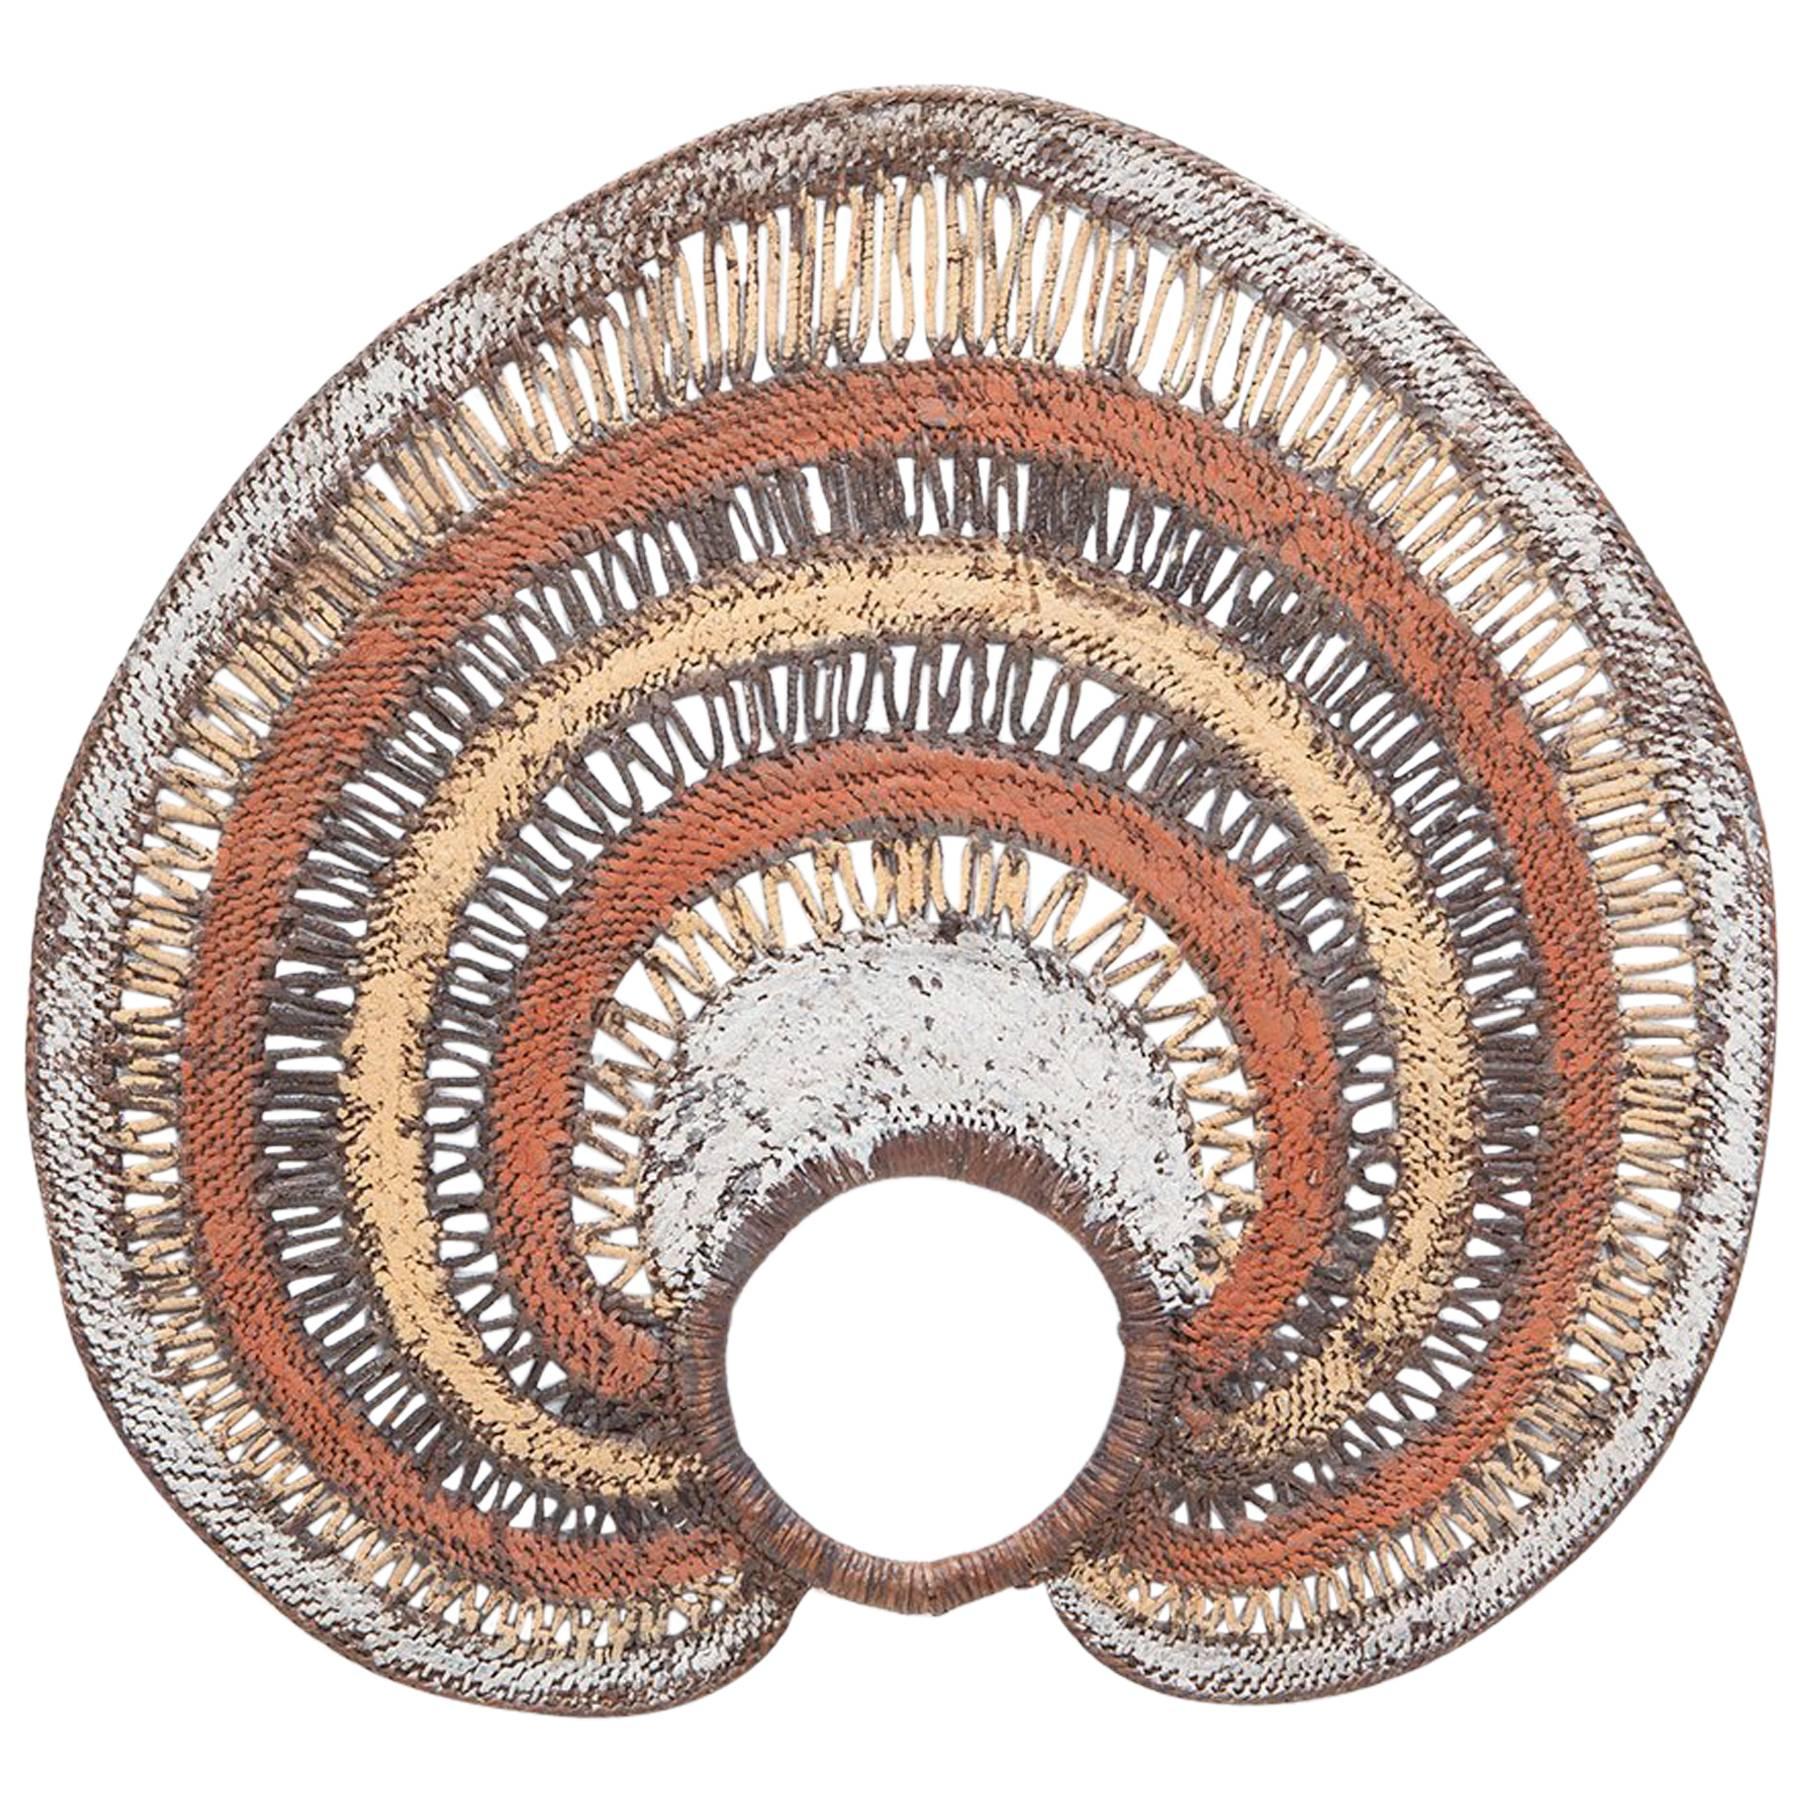 Tribal Occiput Ornament from Papua New Guinea